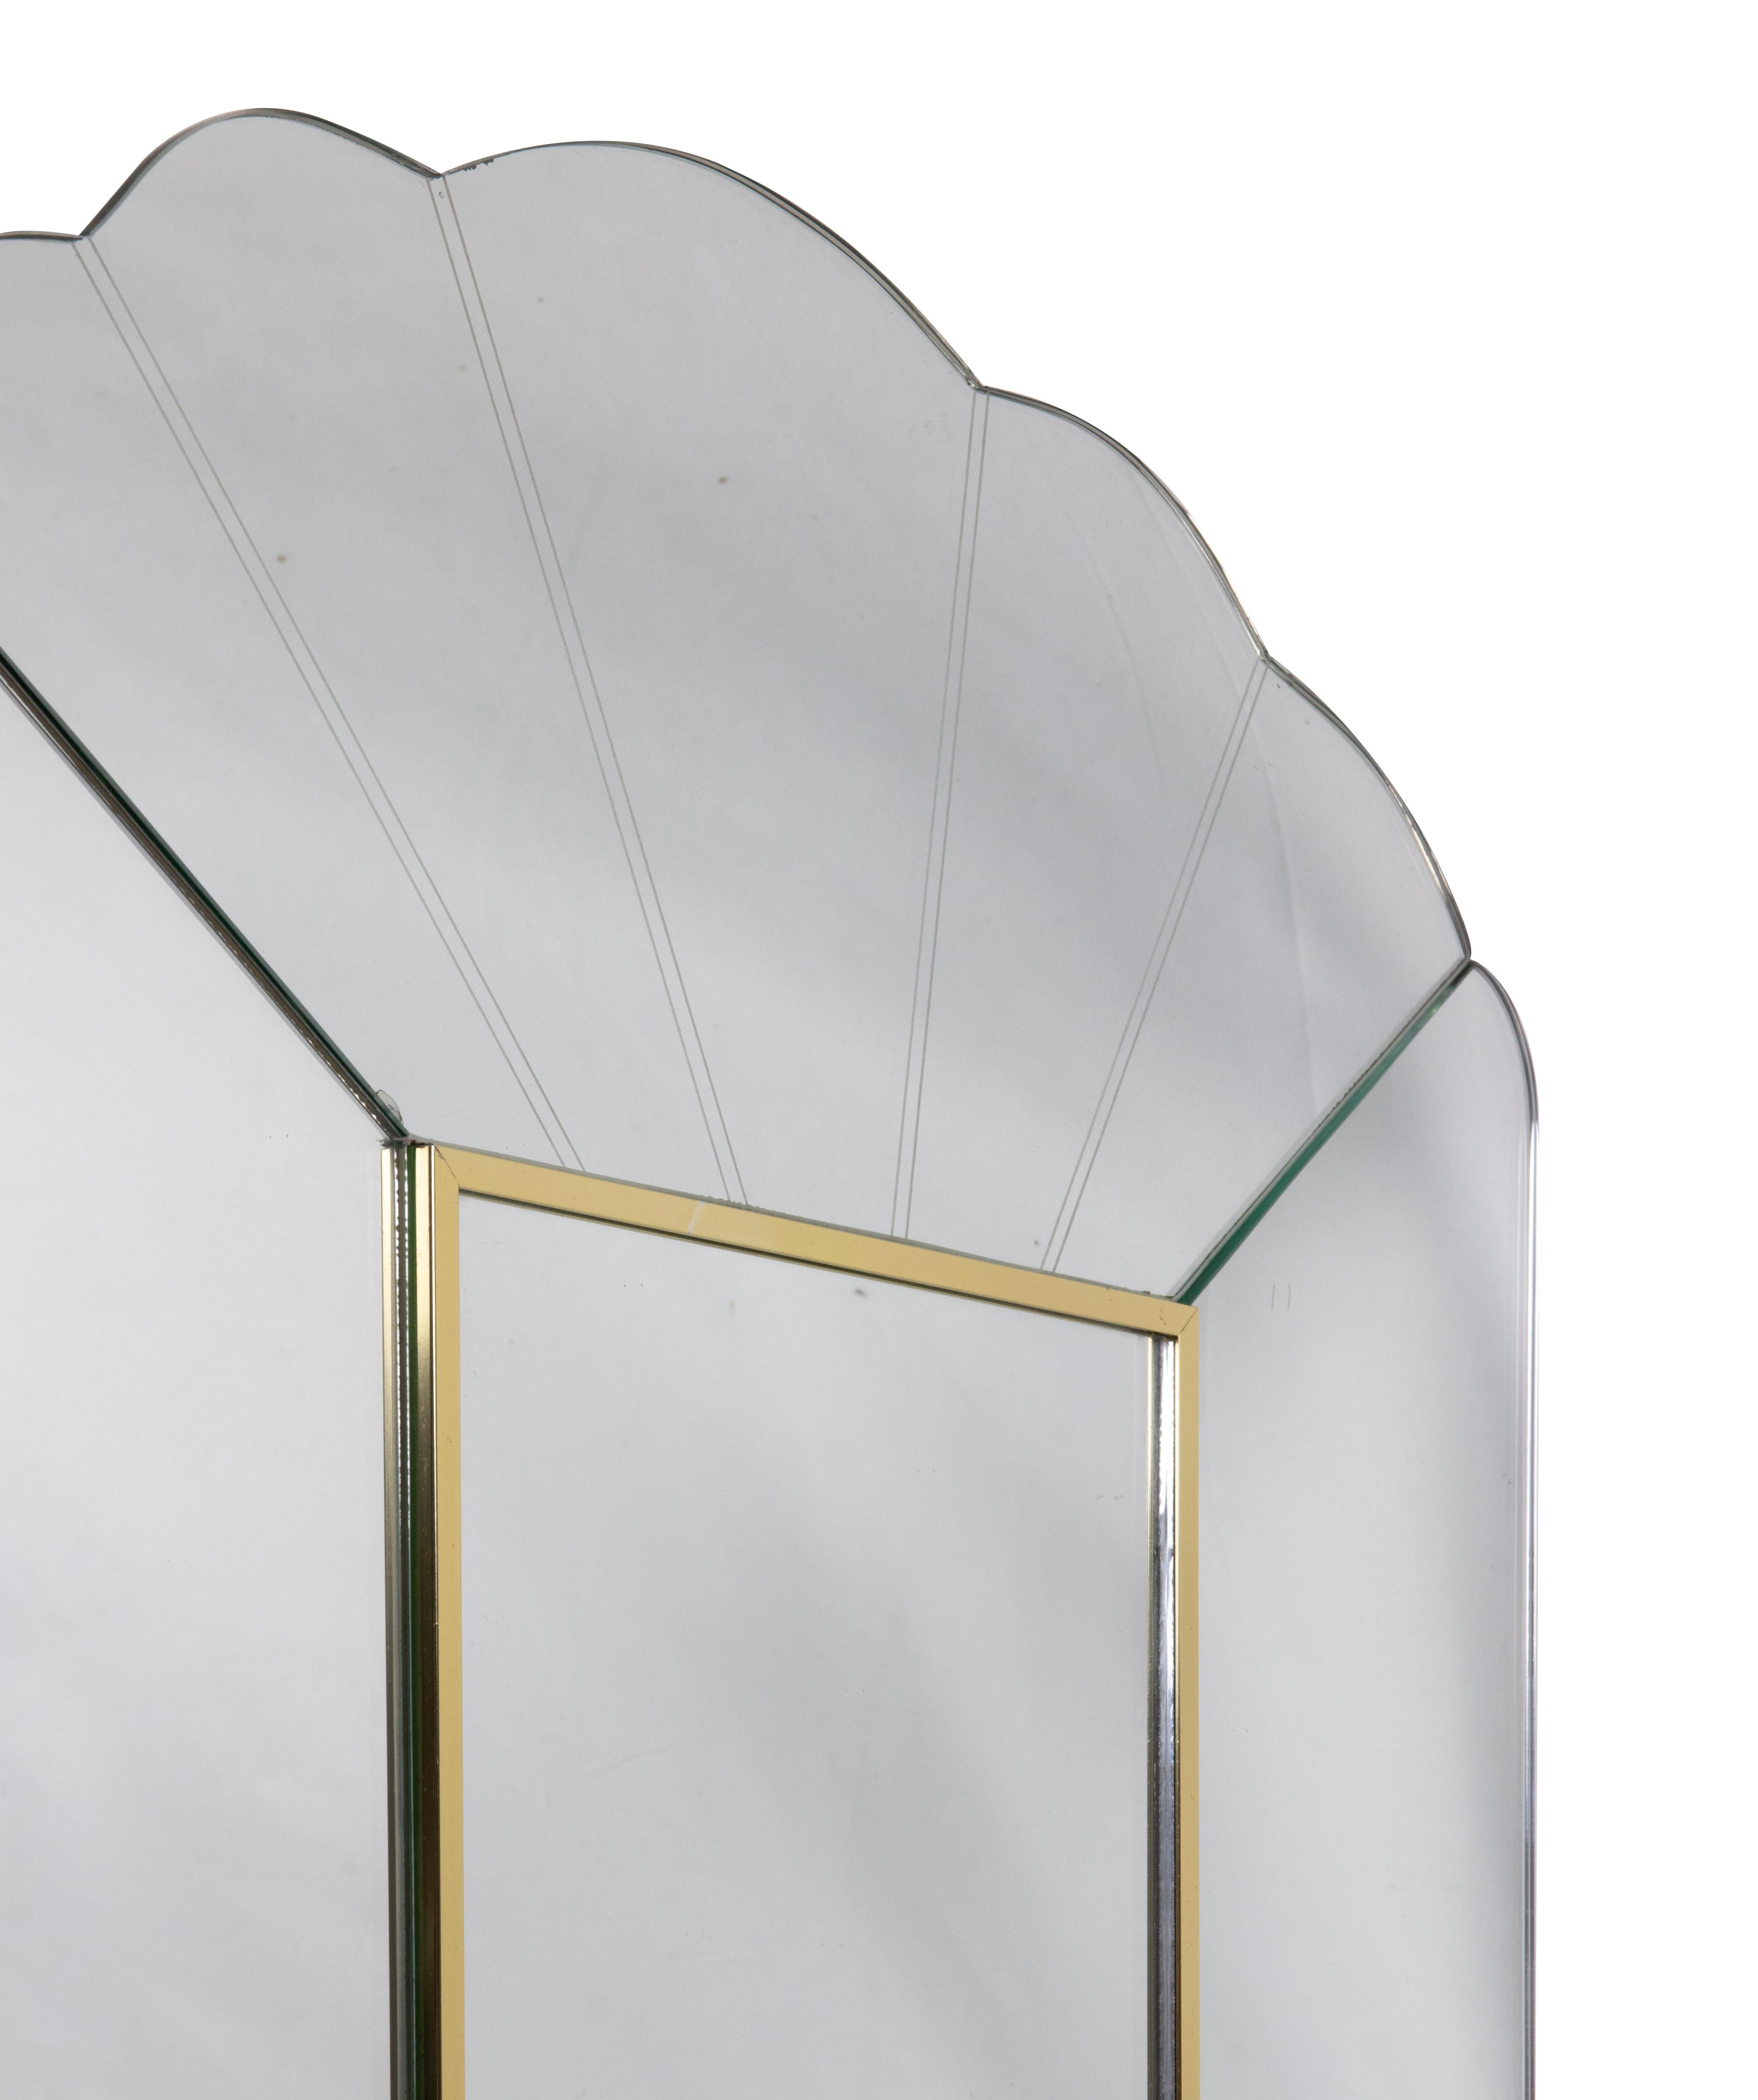 Late 20th Century AD008 Mirror by Alain Delon for Maison Jansen, France, 1970s For Sale